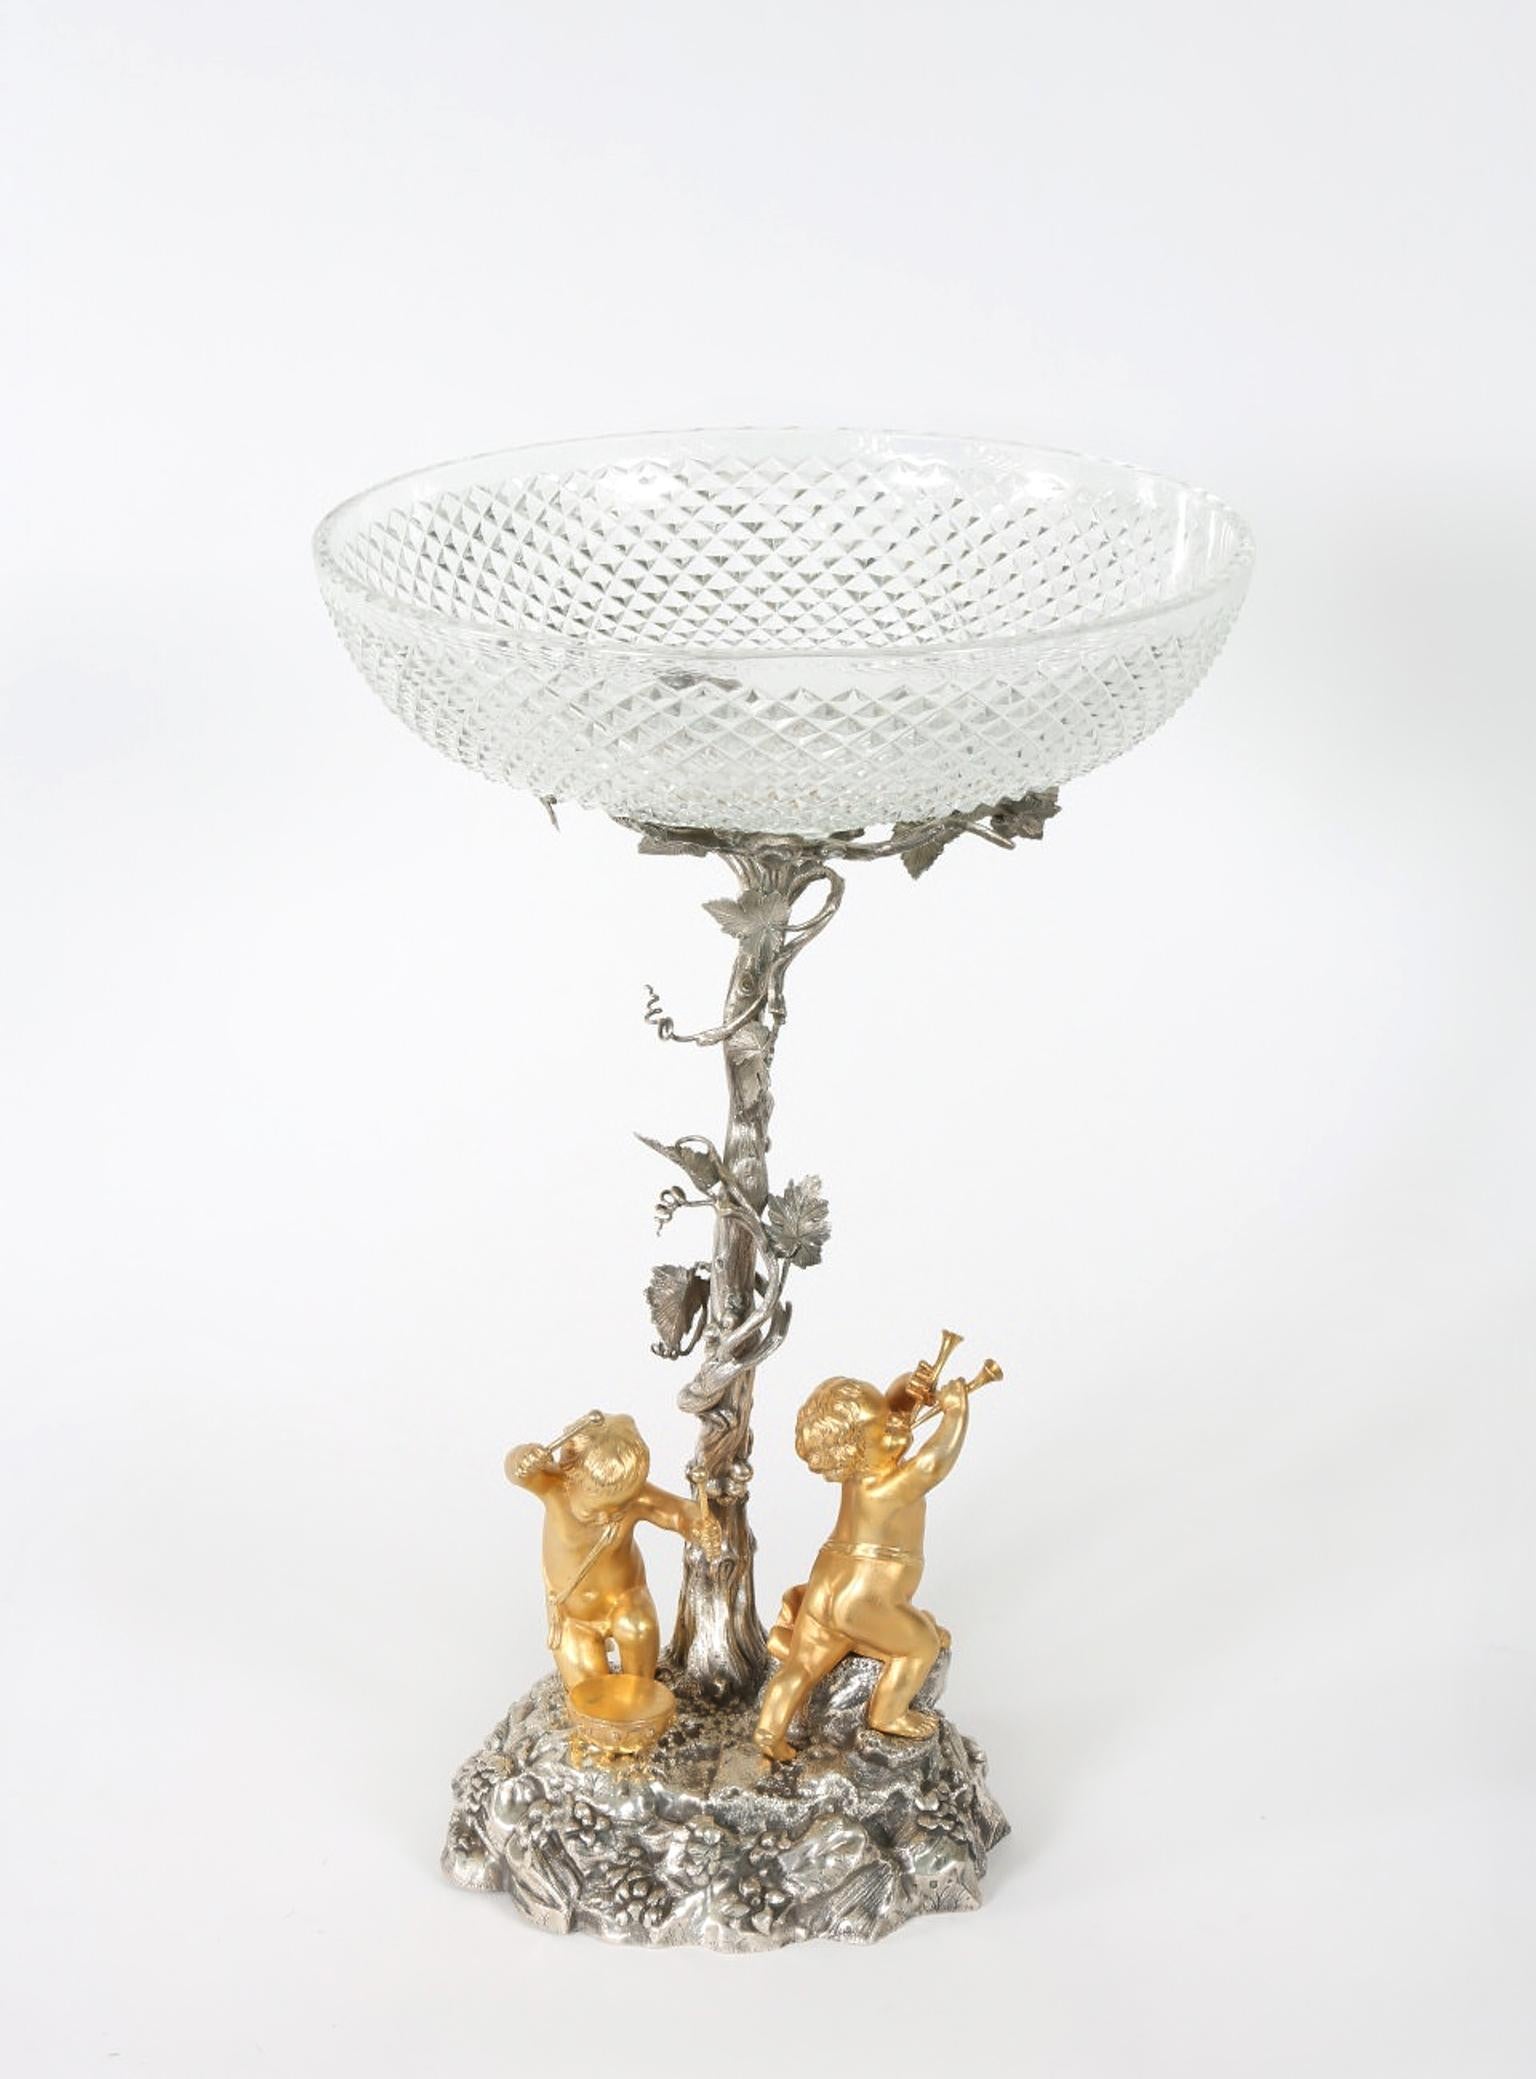 English Elkington silver plated / cut crystal tableware centerpiece with two standing putti playing instruments at the foot of an ivy wrapped tree. The piece is in great antique condition . maker's mark undersigned . The piece stand about 16